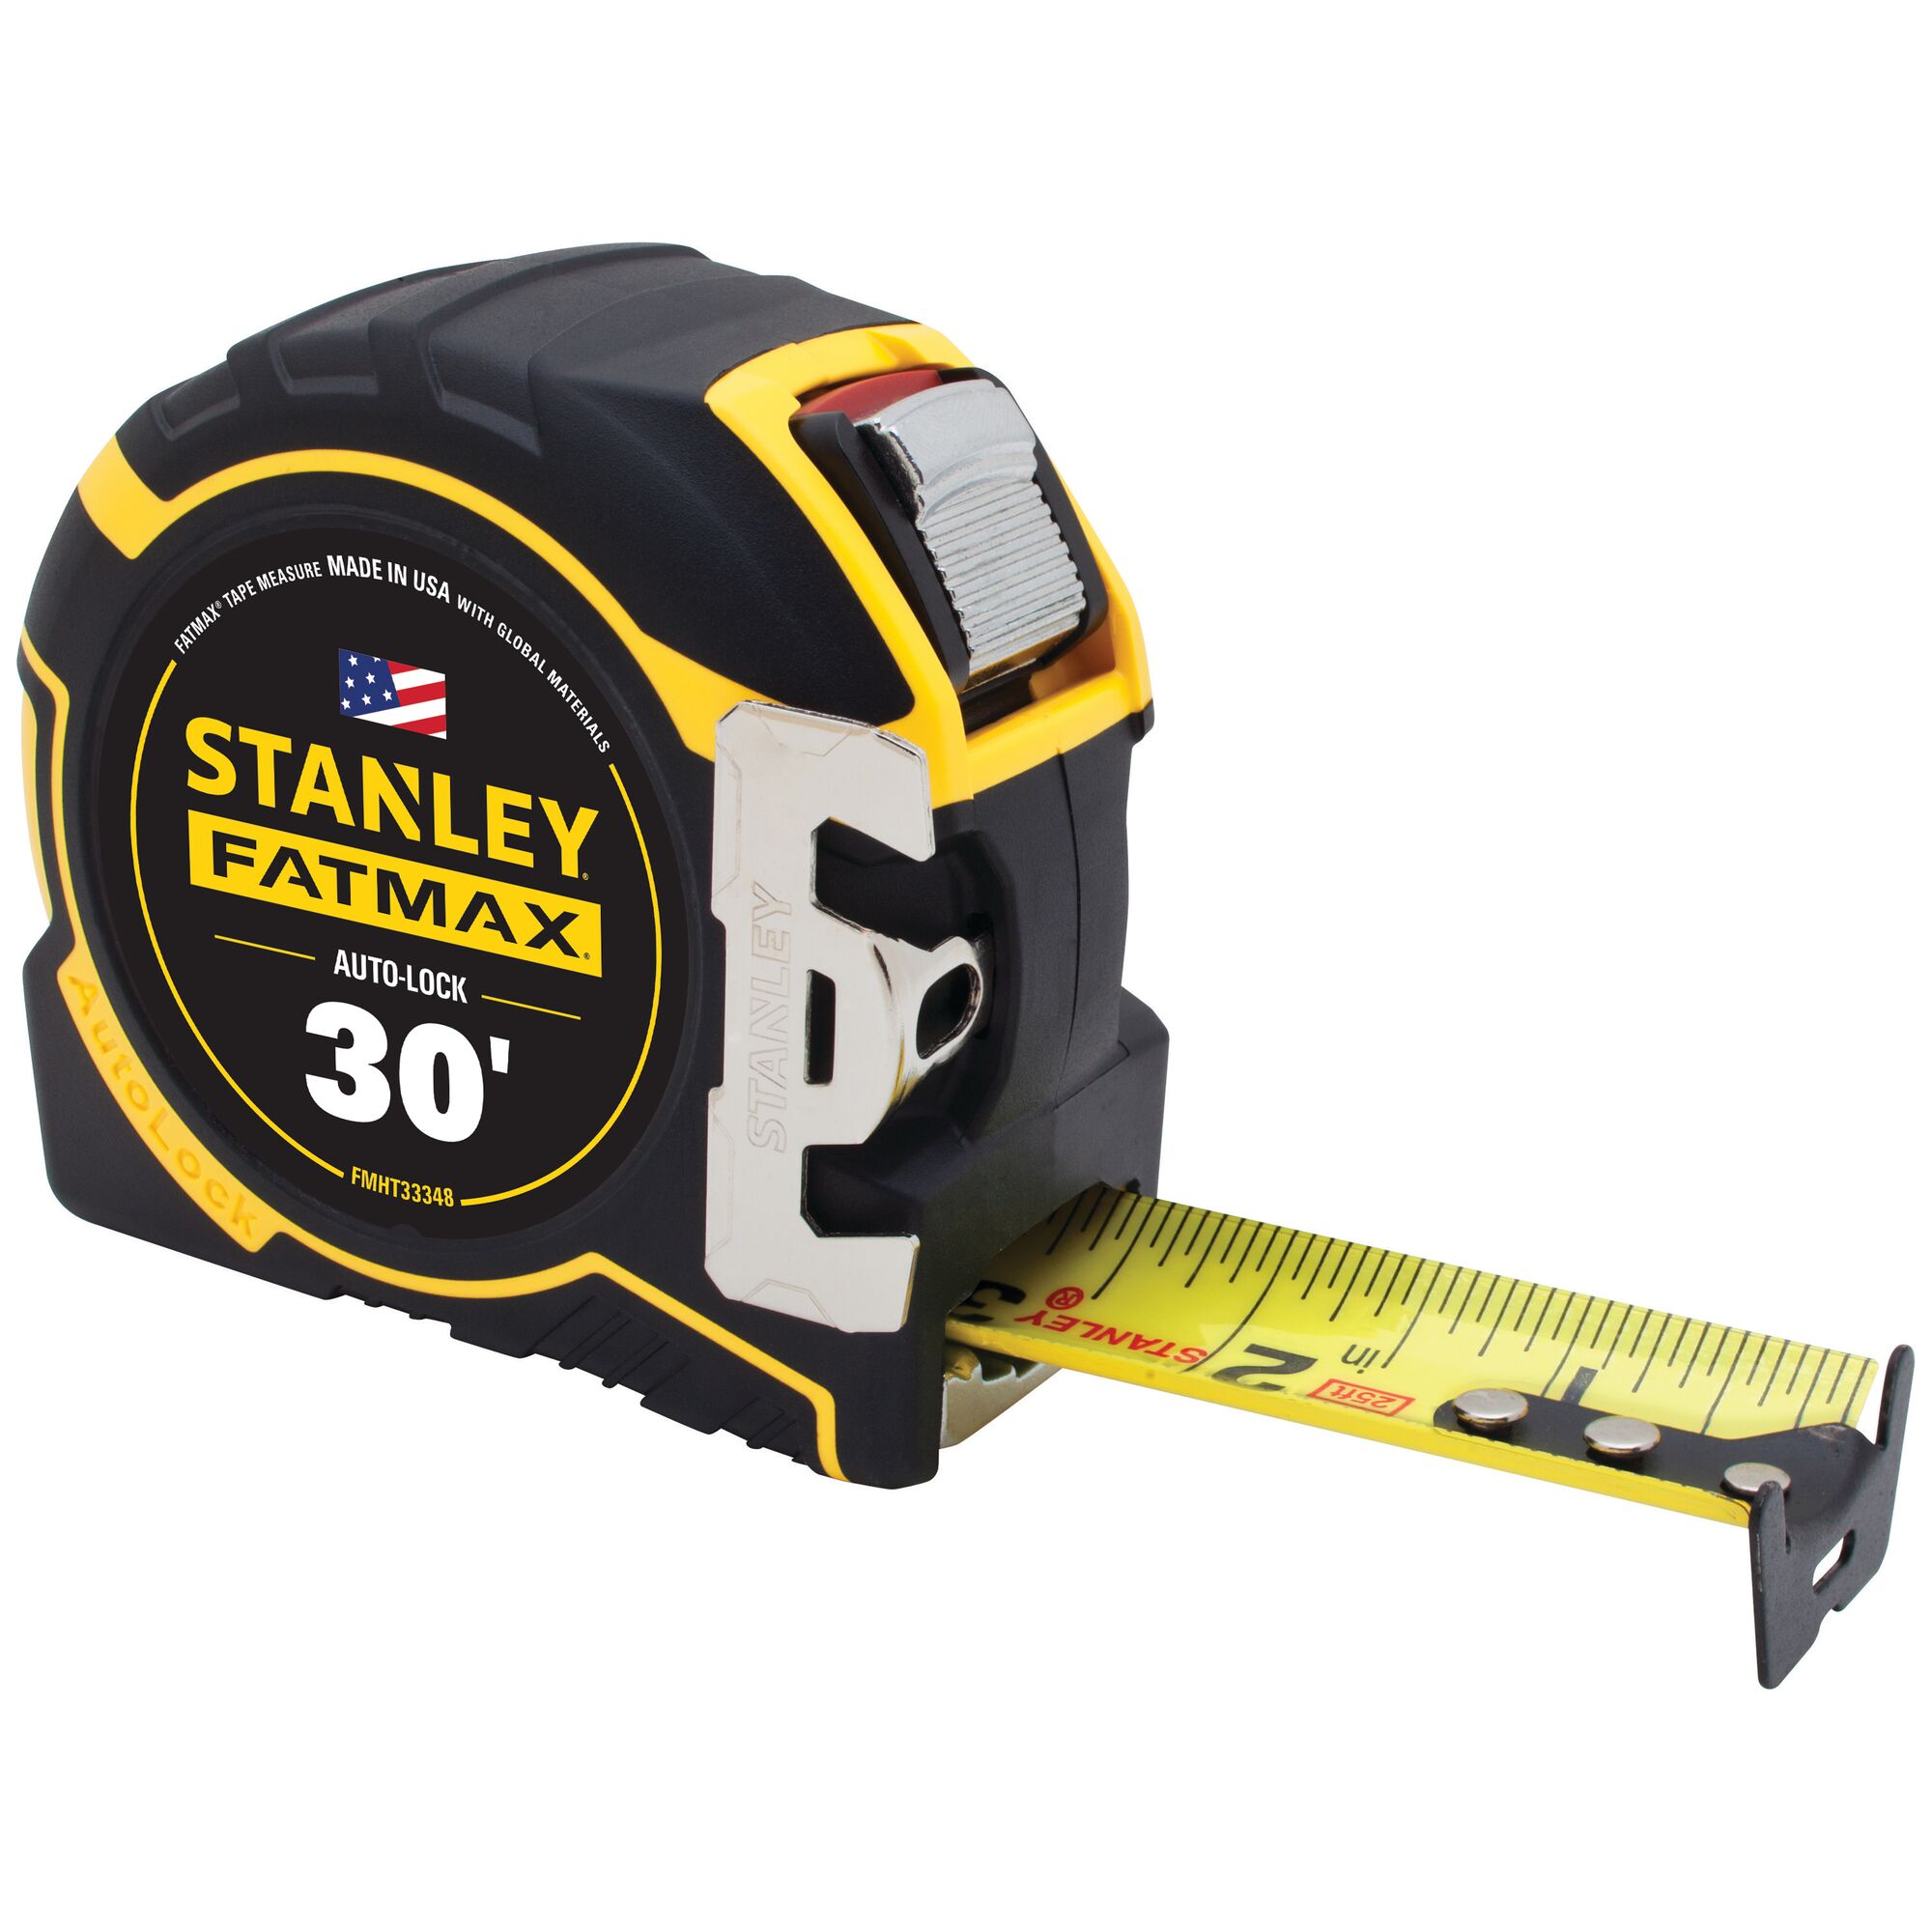 STANLEY 30 FT FATMAX TAPE MEASURE NEW SEALED PACKAGE 